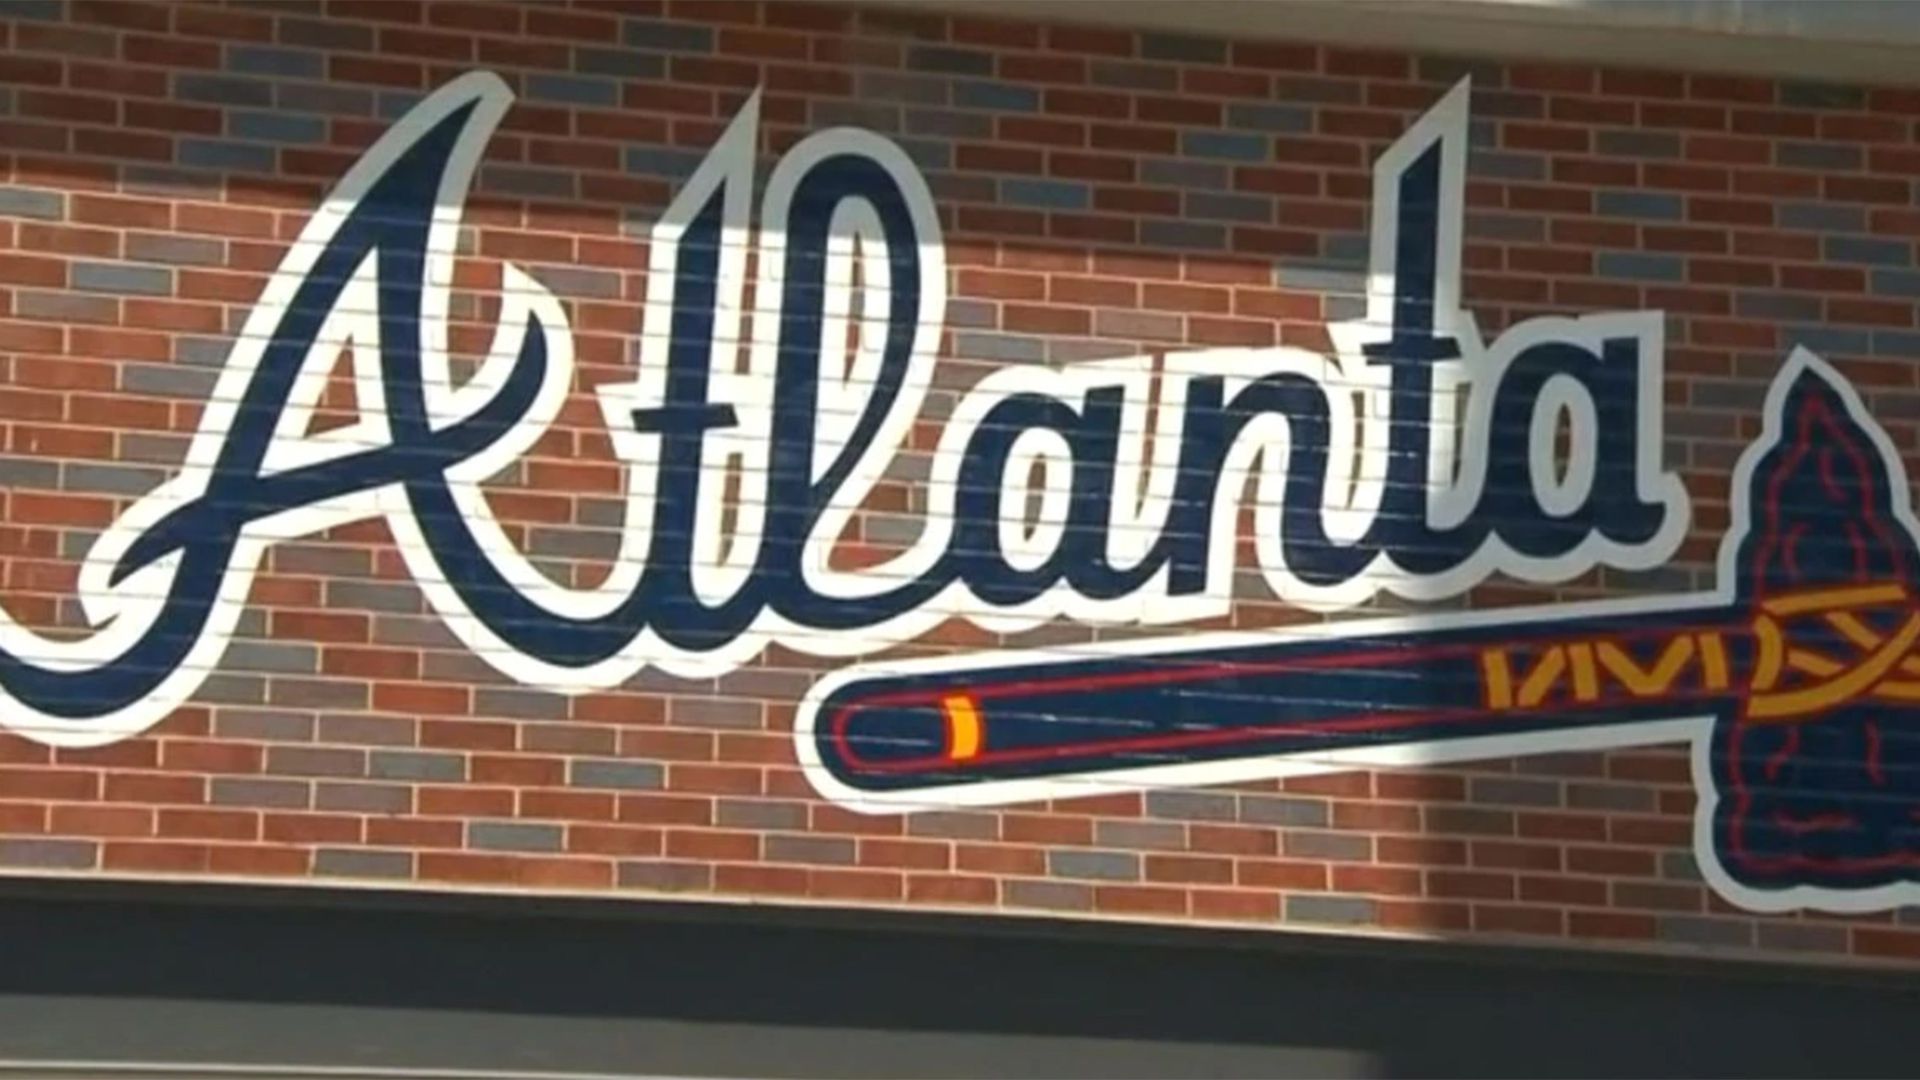 Atlanta Braves Won't Change Name, But Are Discussing the Tomahawk